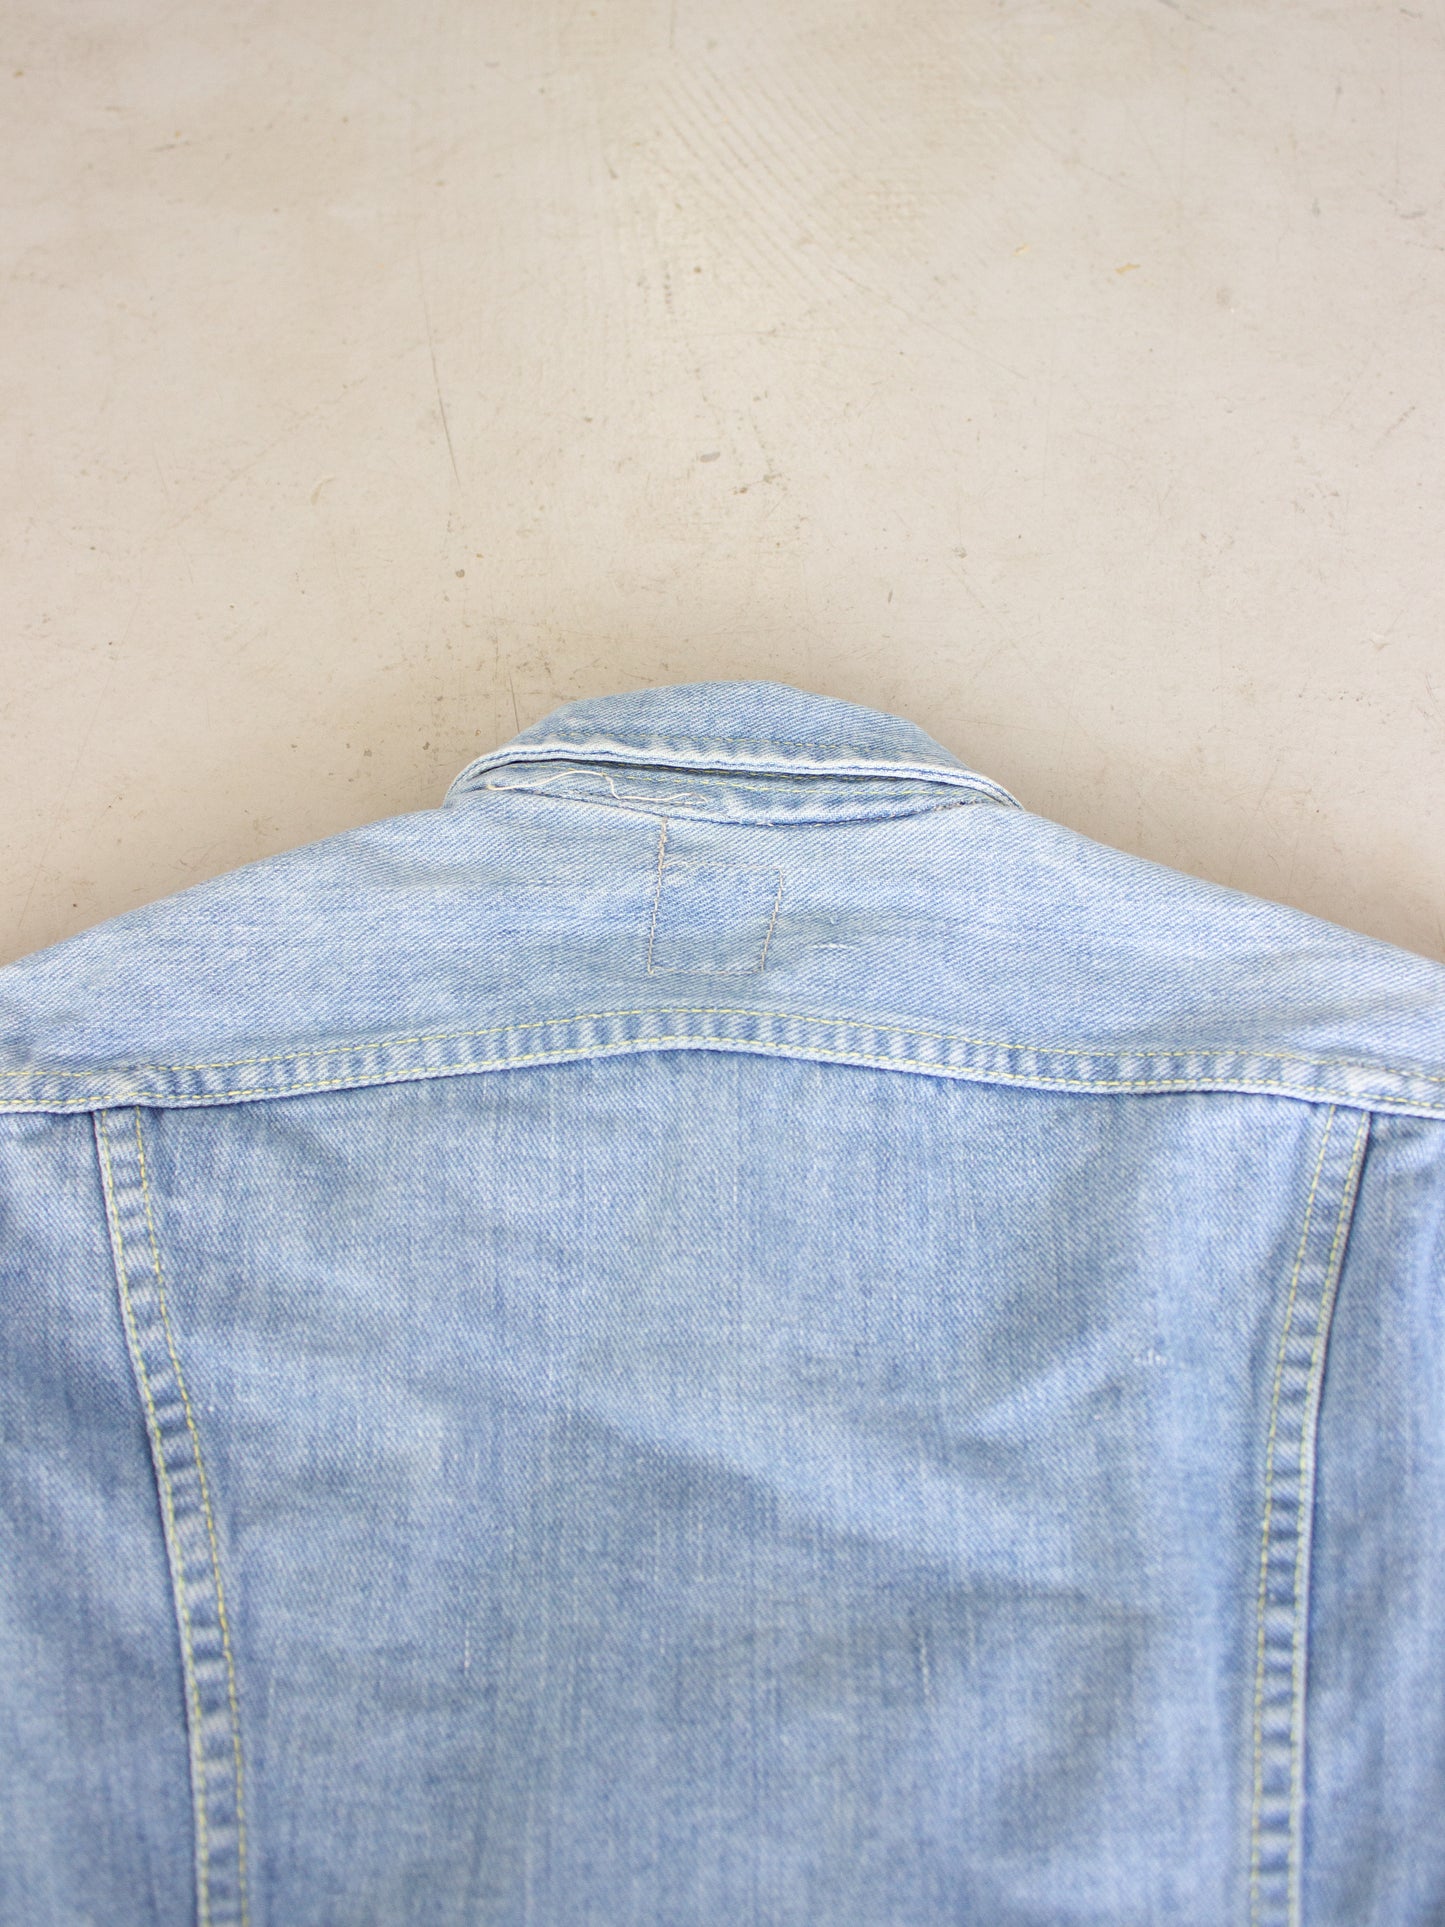 1970's Lee Riders Union Made Jean Jacket Made In USA Light Wash PATD-153438 (XX Small- X Small)